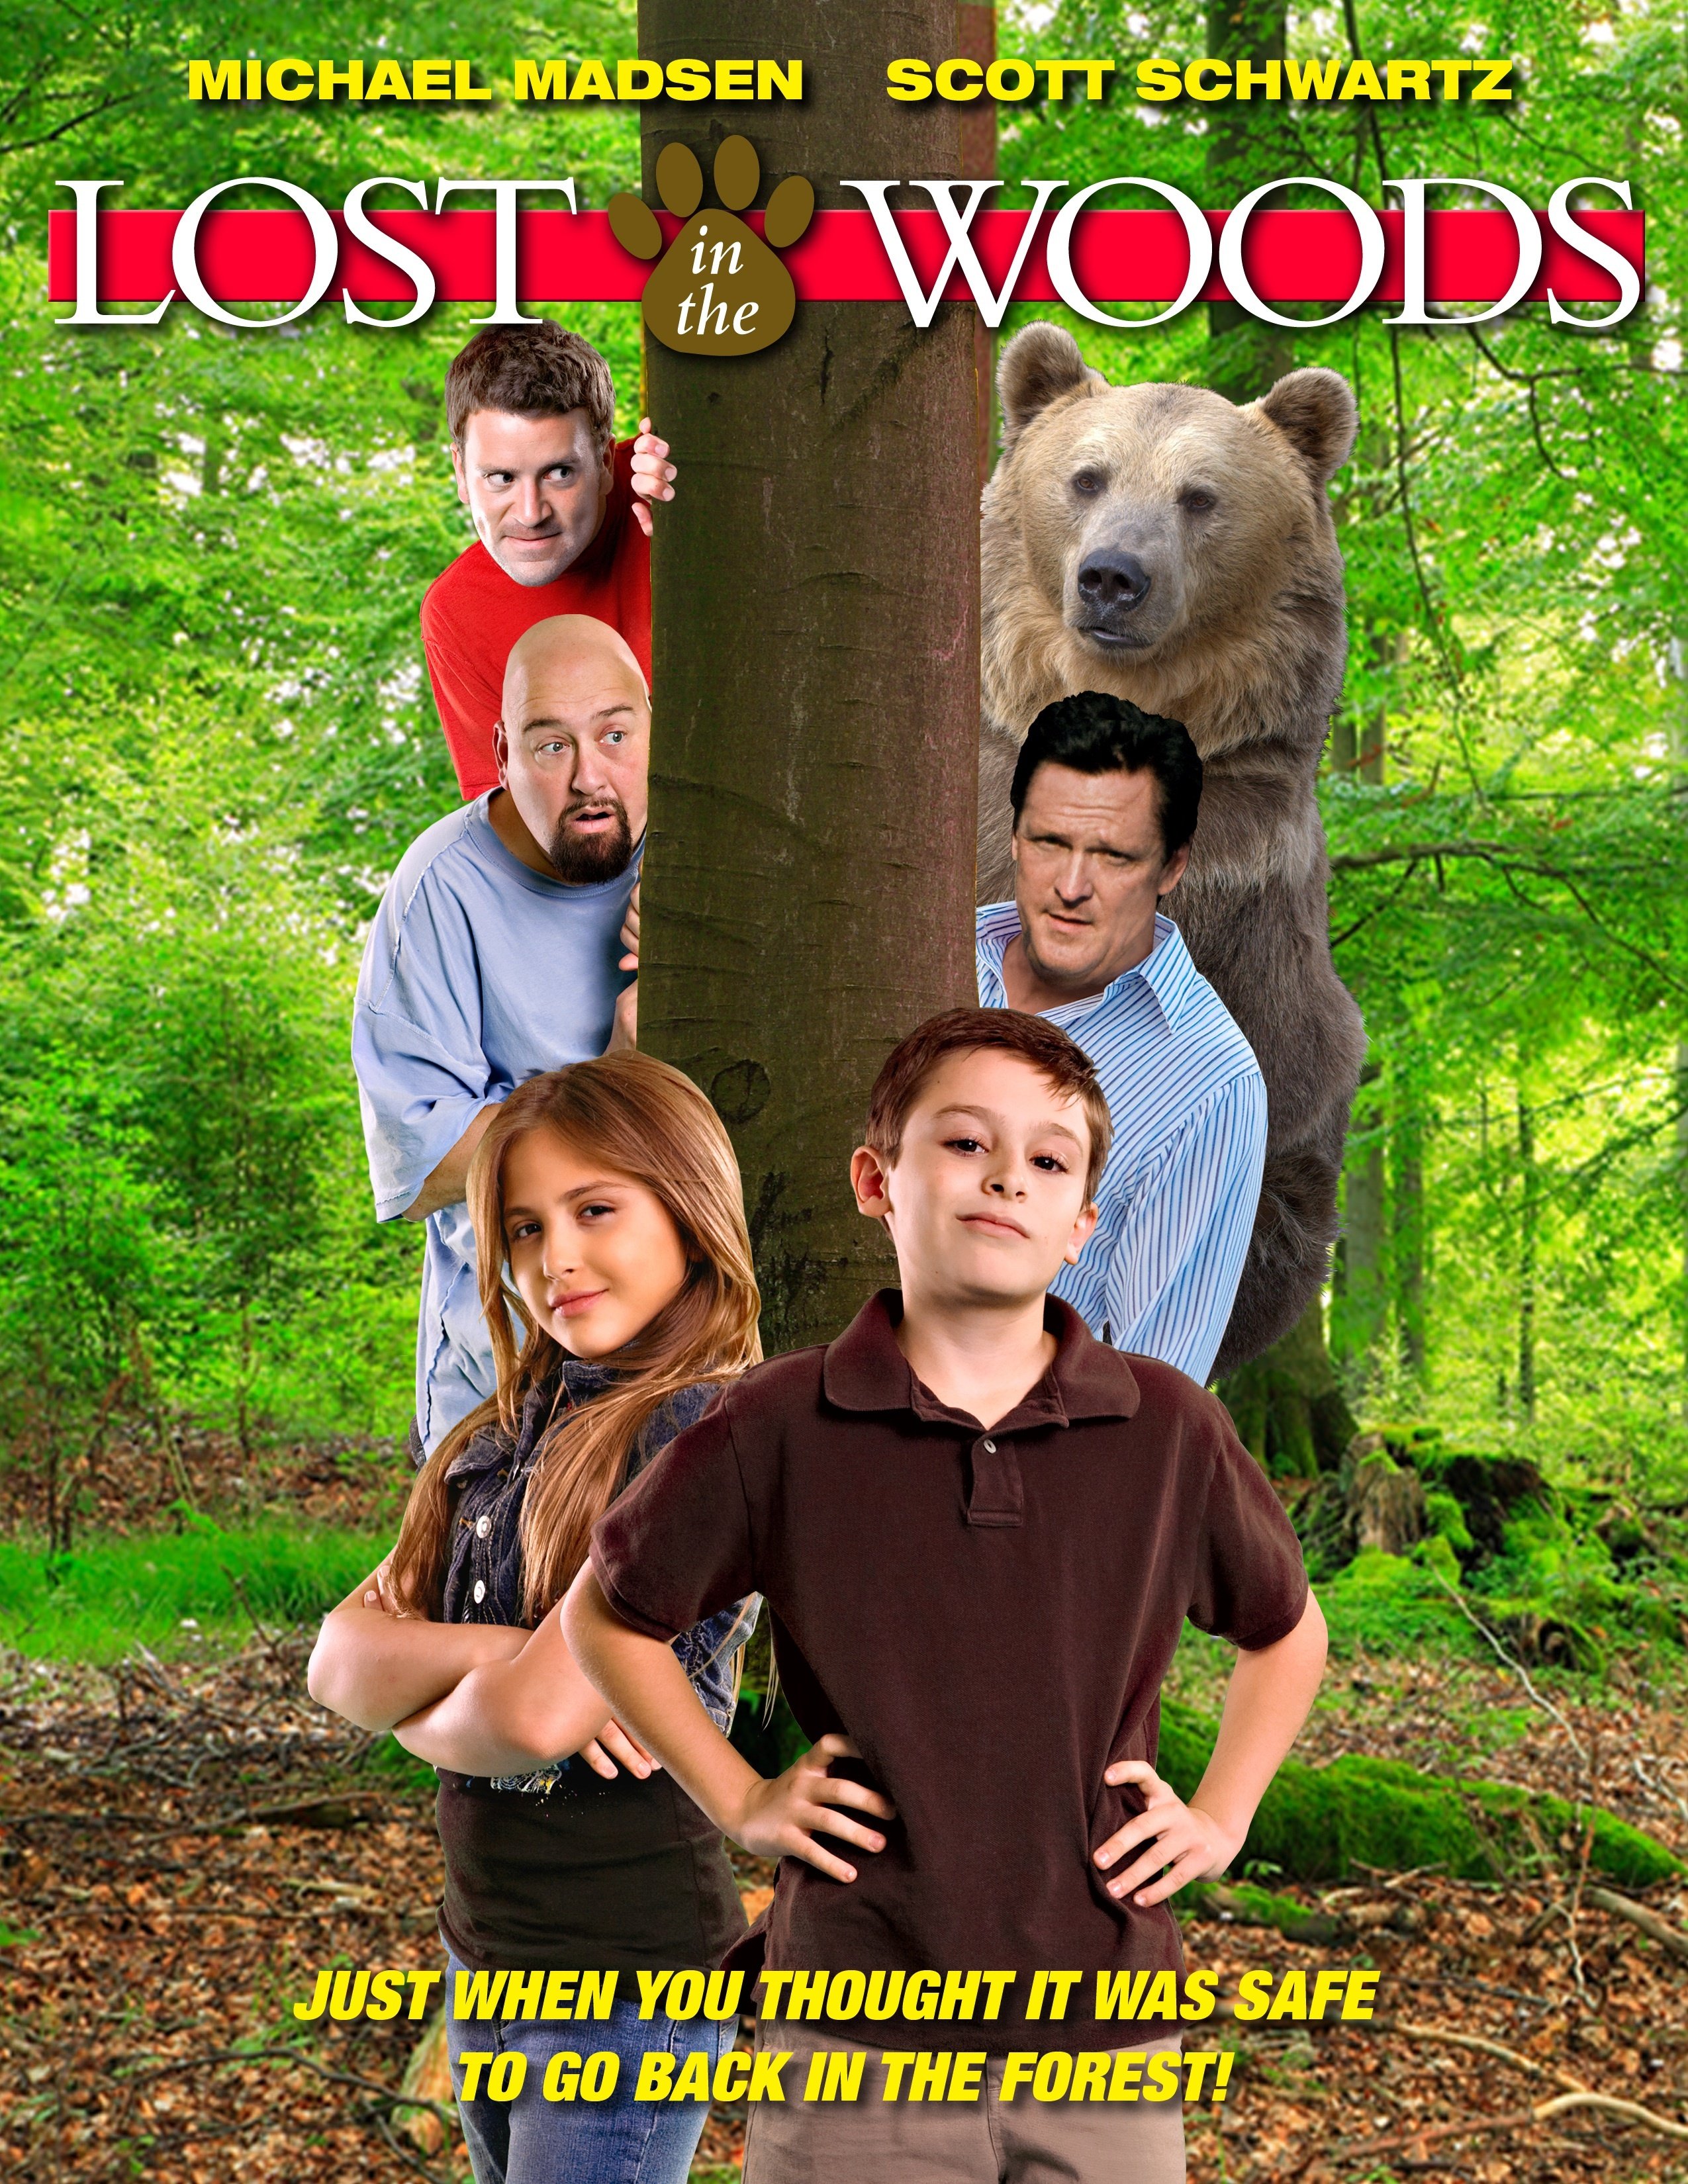 Lost in the Woods (2009) Screenshot 1 